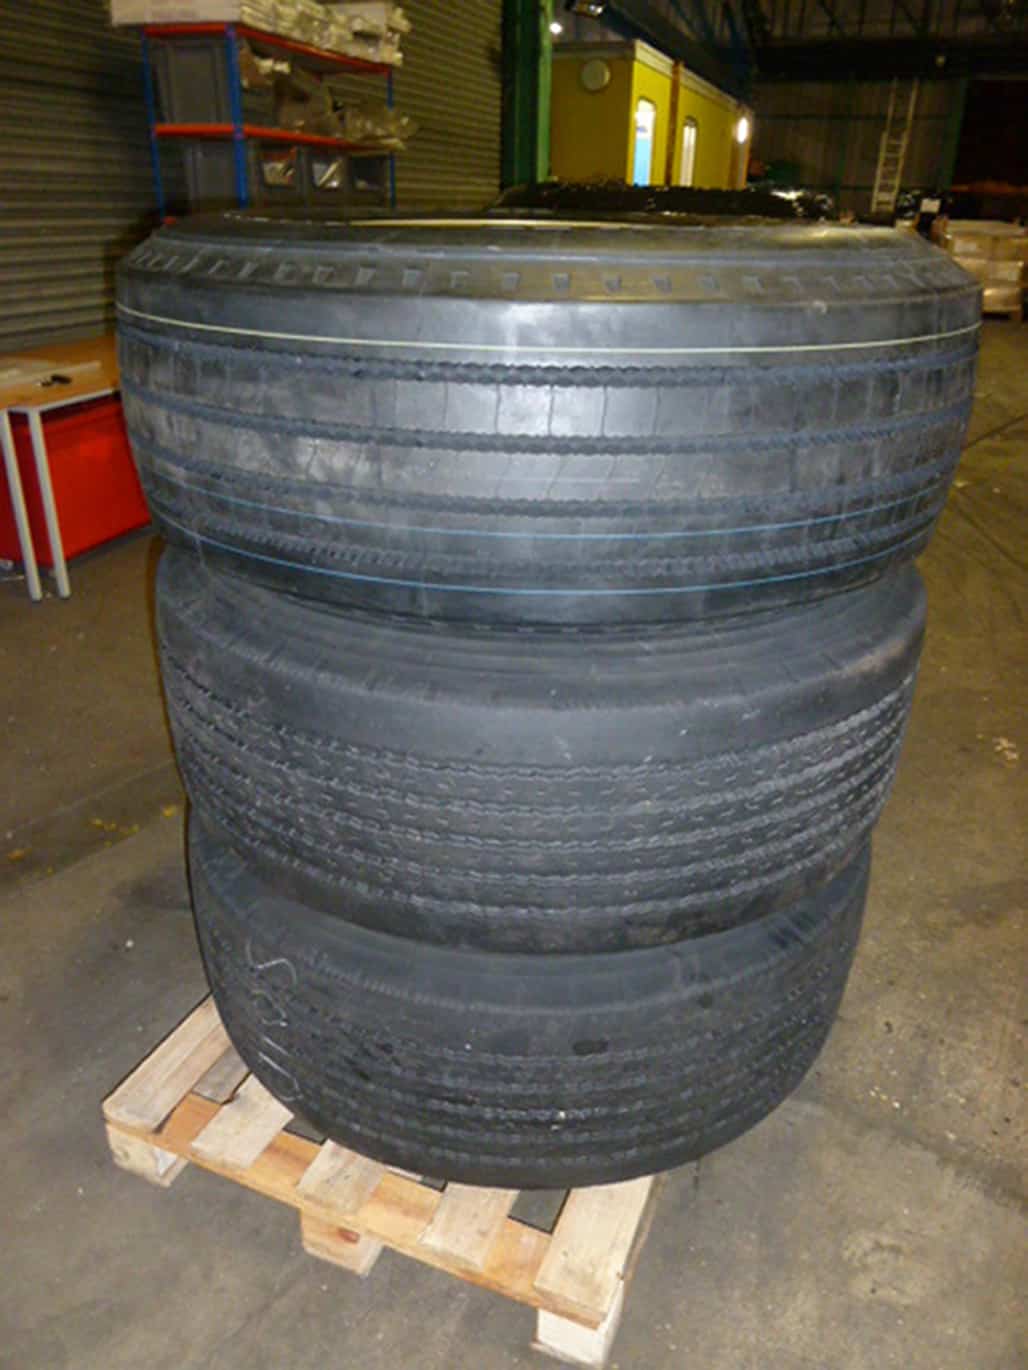 Undated handout photo issued by the National Crime Agency of tyres which were found stuffed with cocaine with an estimated street value of £50 million on the back of a lorry. The huge drugs seizure was made in Dover, Kent, on Wednesday evening, the NCA said. The lorry driver, 56-year-old Kawus Rafiei, from Riedbahn in Germany, was questioned and later charged with the importation of a controlled substance.